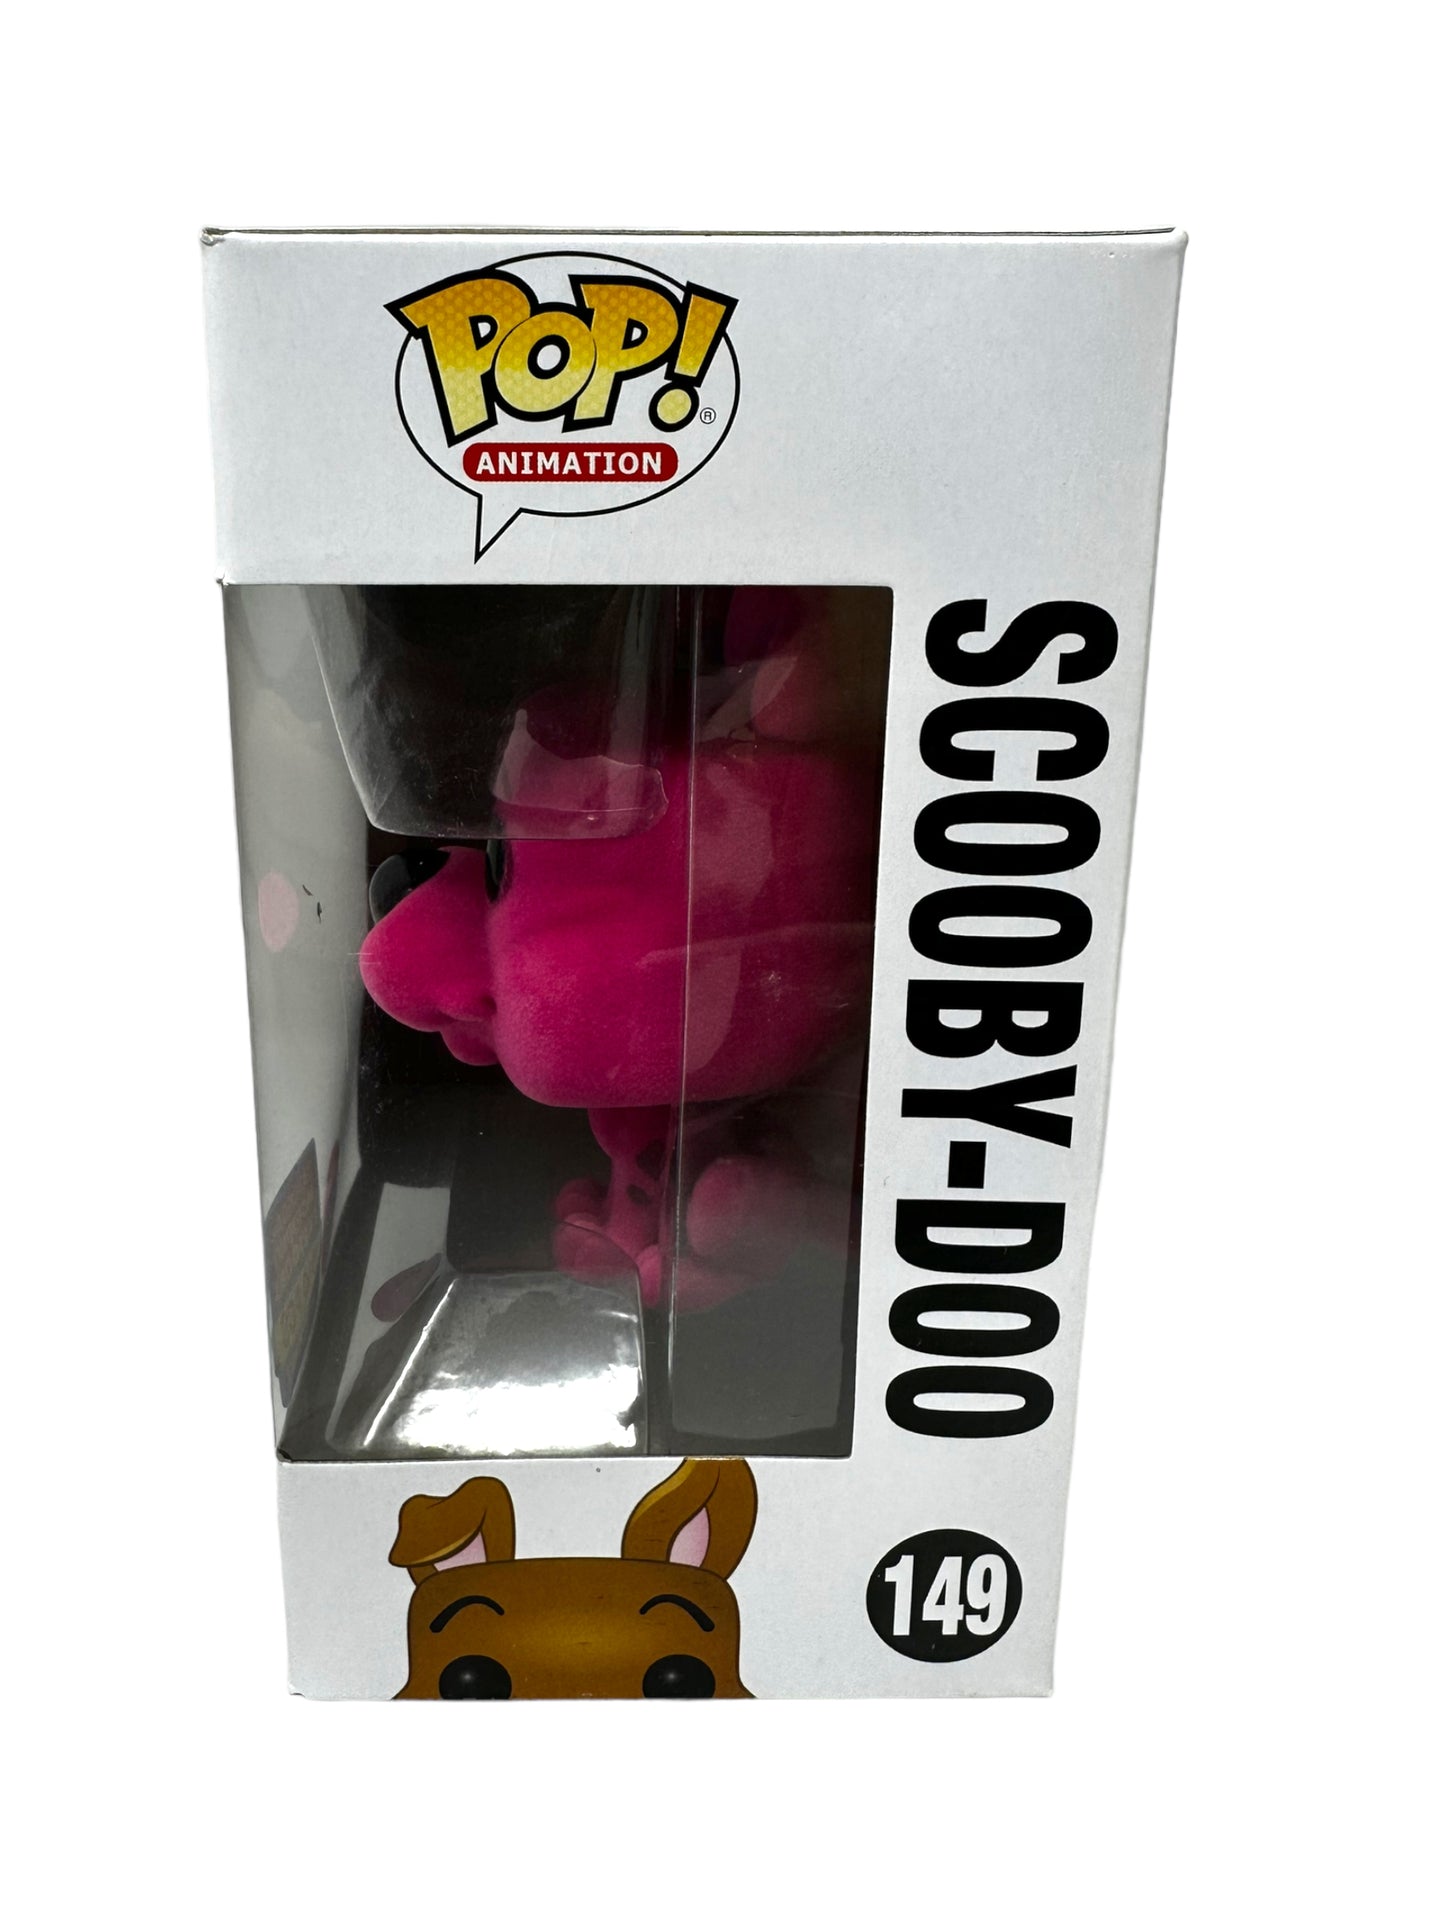 Sold 10/21 2017 SDCC Scooby Doo Pink Flocked LE1000